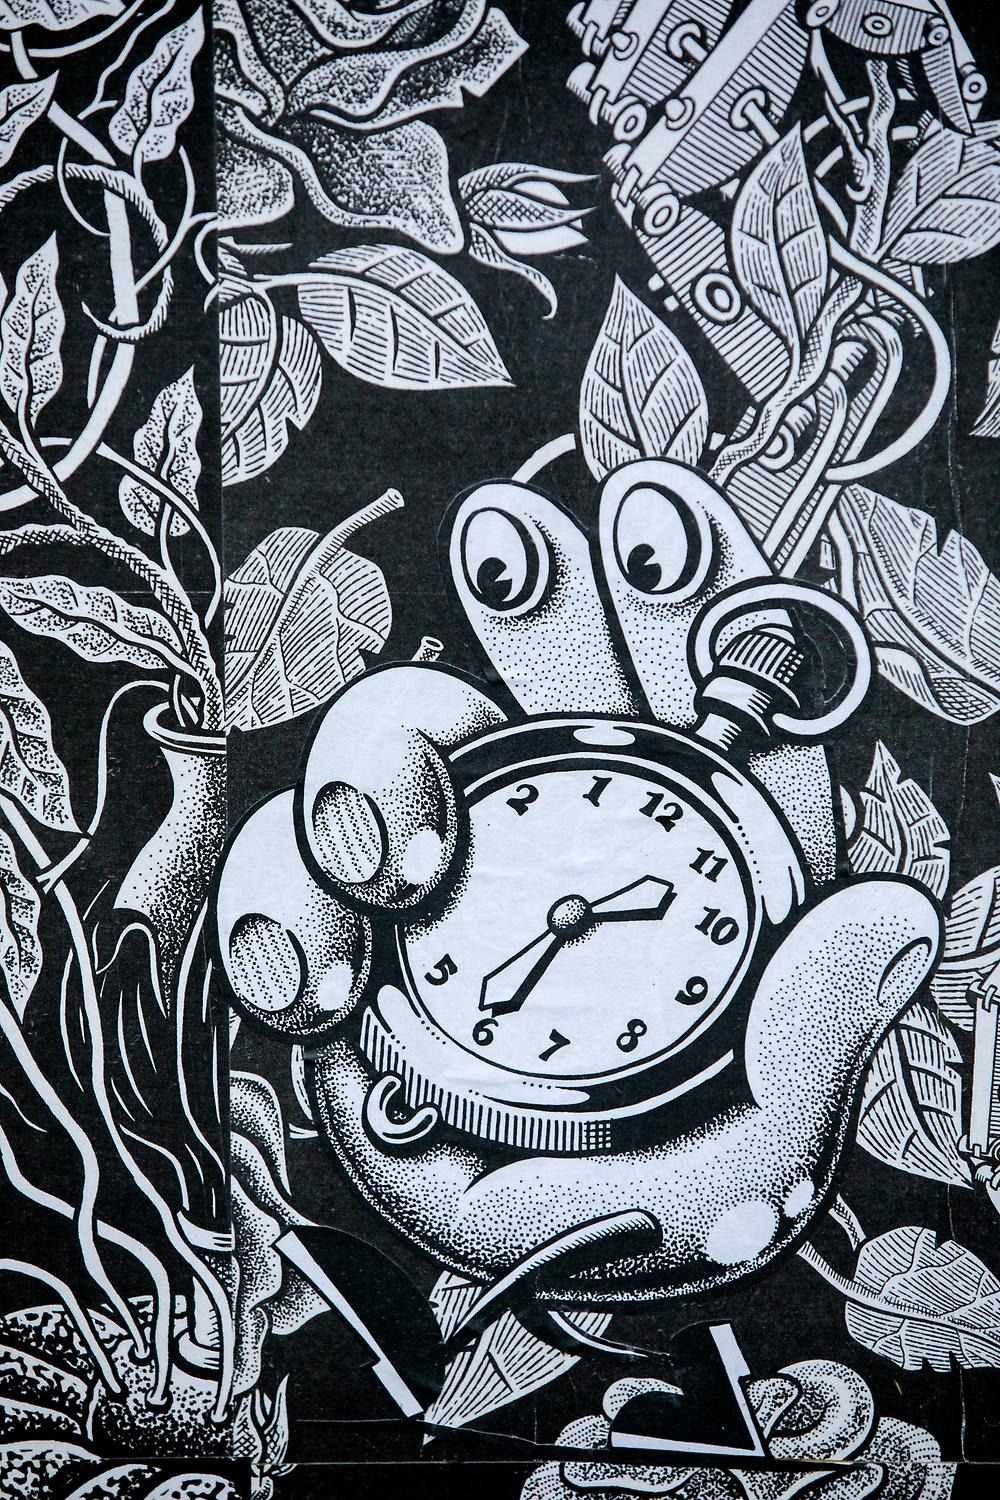 An illustration of a hand holding a clock. A pattern of leaves is visible behind. Everything is drawn in black and white.